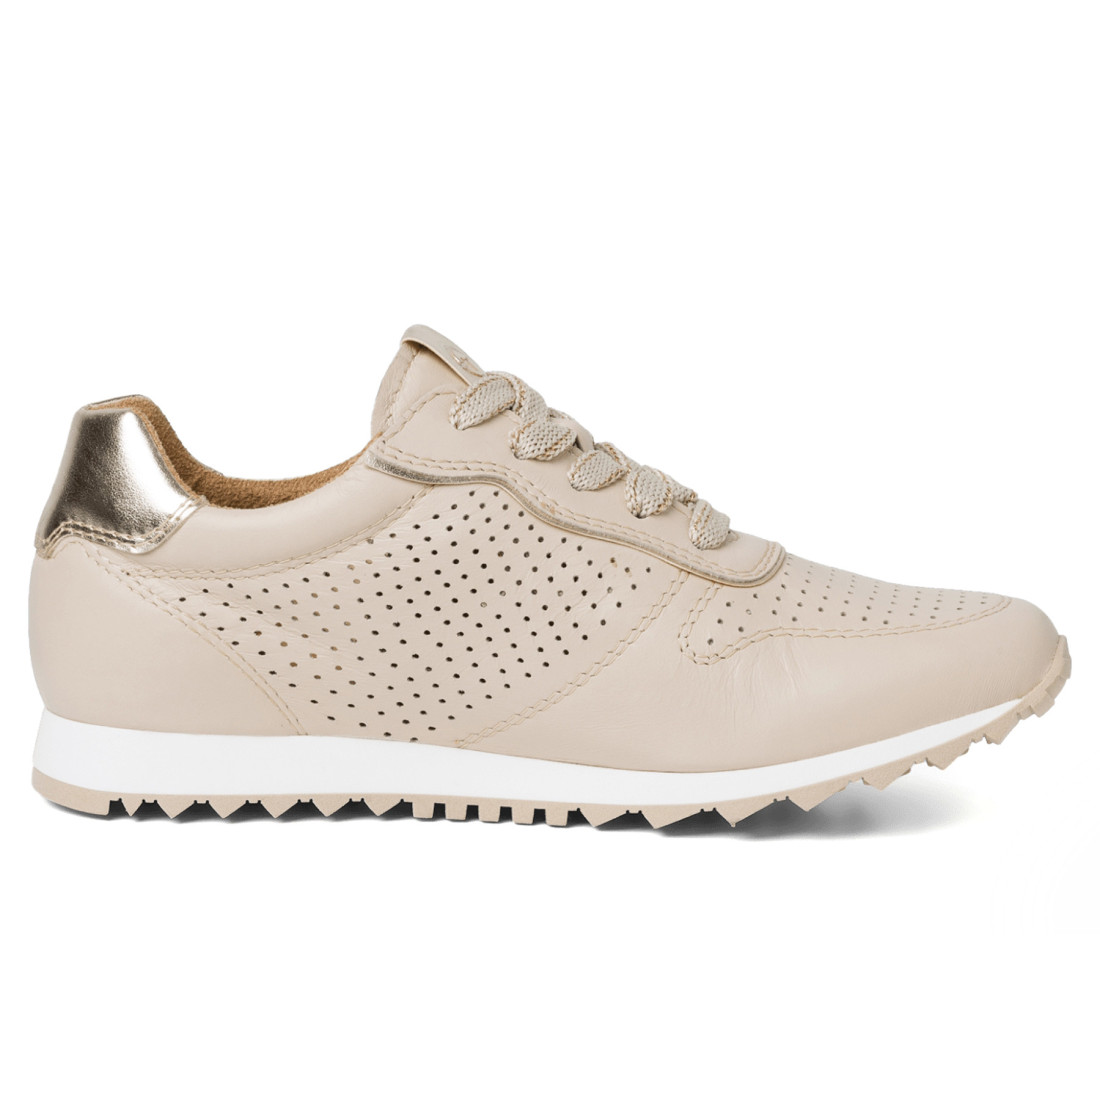 chaos chef langs Tamaris women's sneaker in cream and gold leather